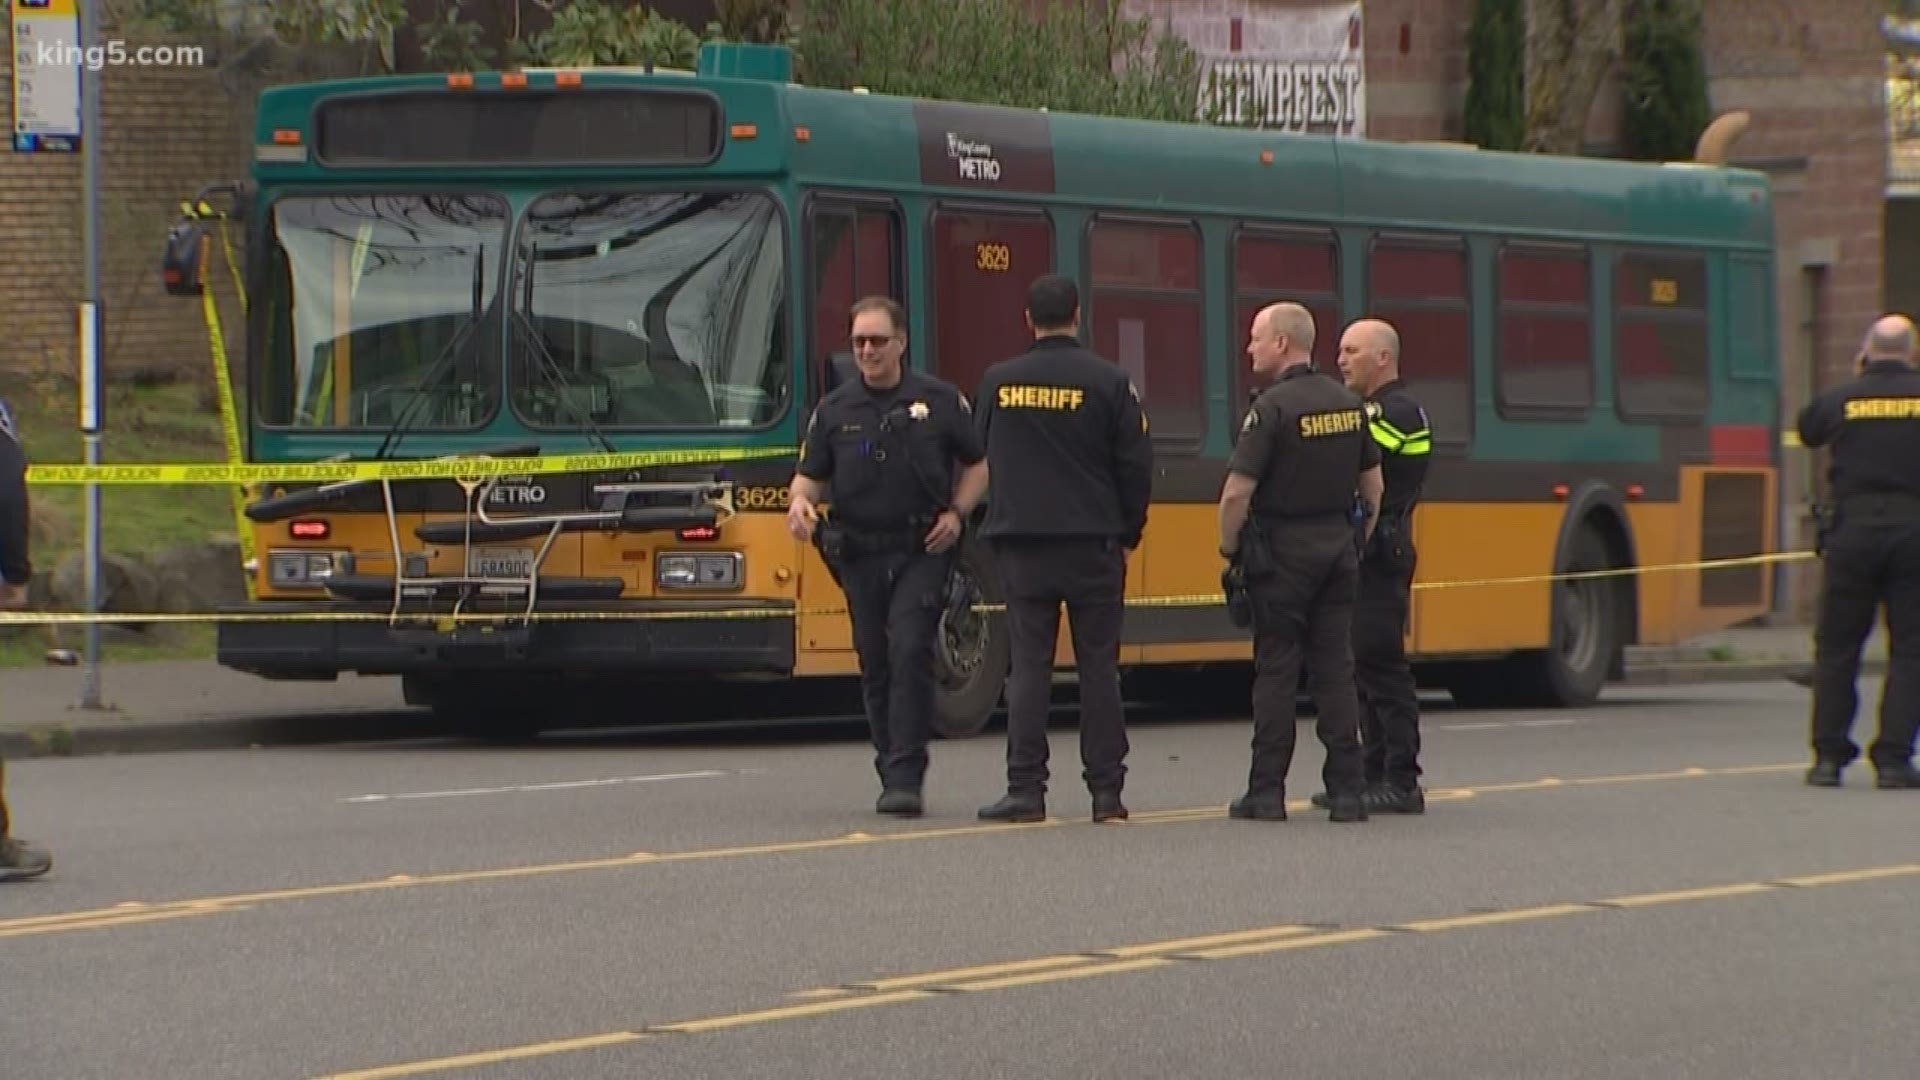 Eric Stark is the man who put his Metro bus in reverse, trying to escape from a series of shootings on Wednesday. He managed to get those passengers to safety, all while putting pressure on a bullet wound to his chest. The crime spree of carjackings and shootings ended up taking two lives that day. KING 5's Michael Crowe has the story.